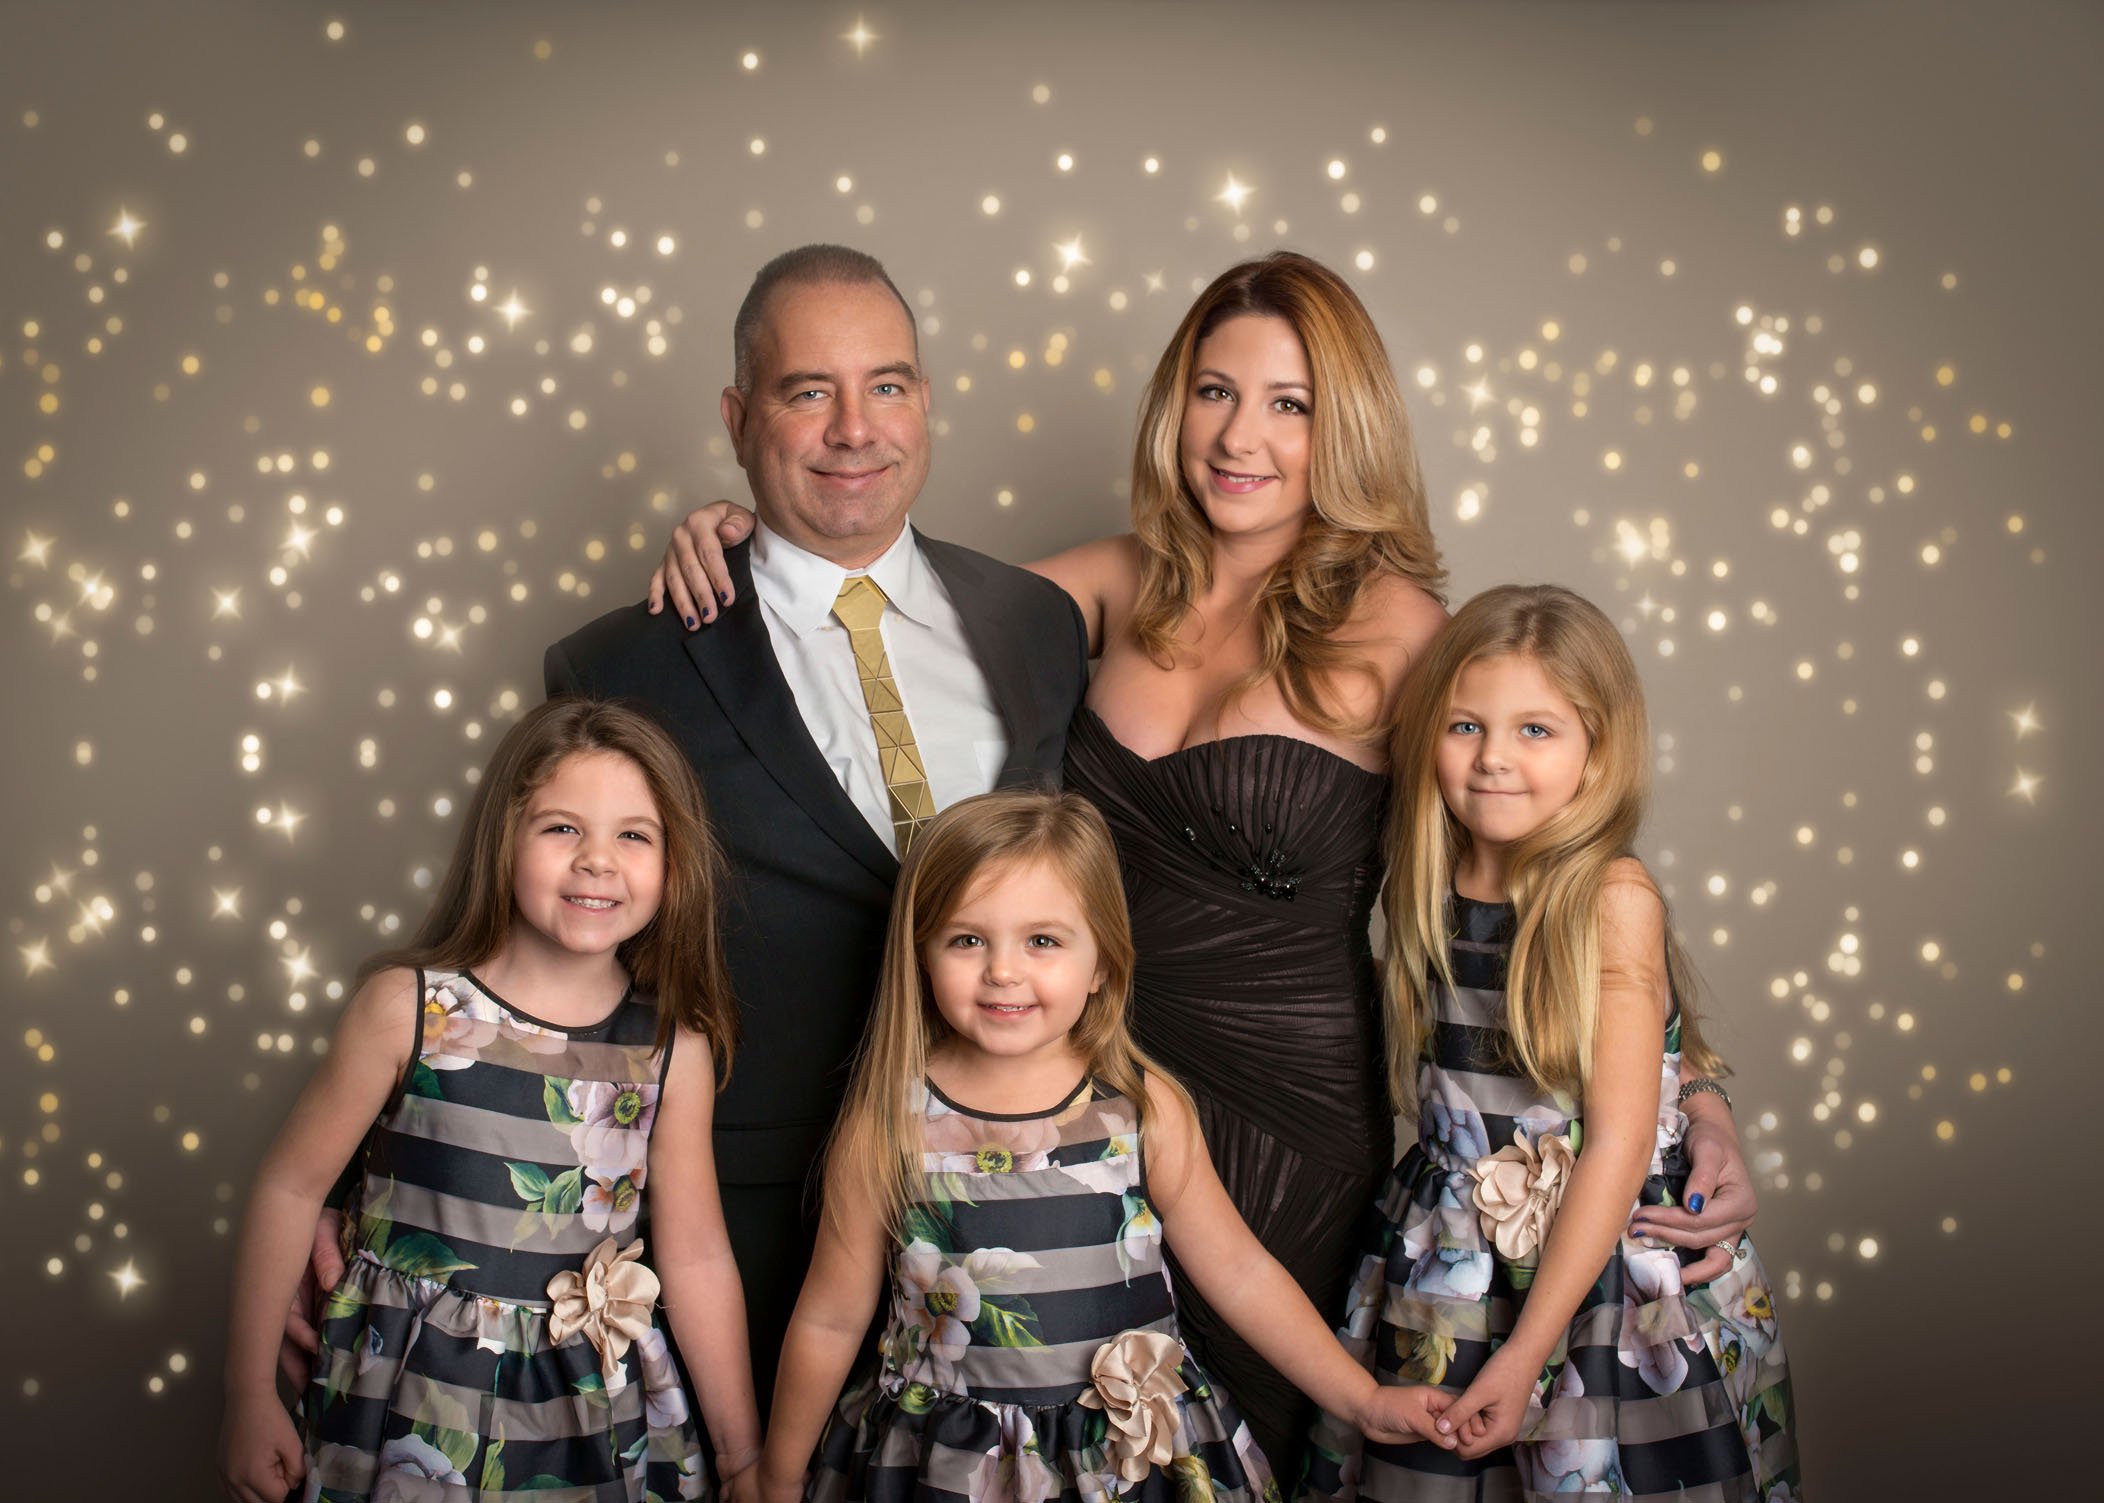 Family with 3 young daughters pose in front of bokeh backdrop